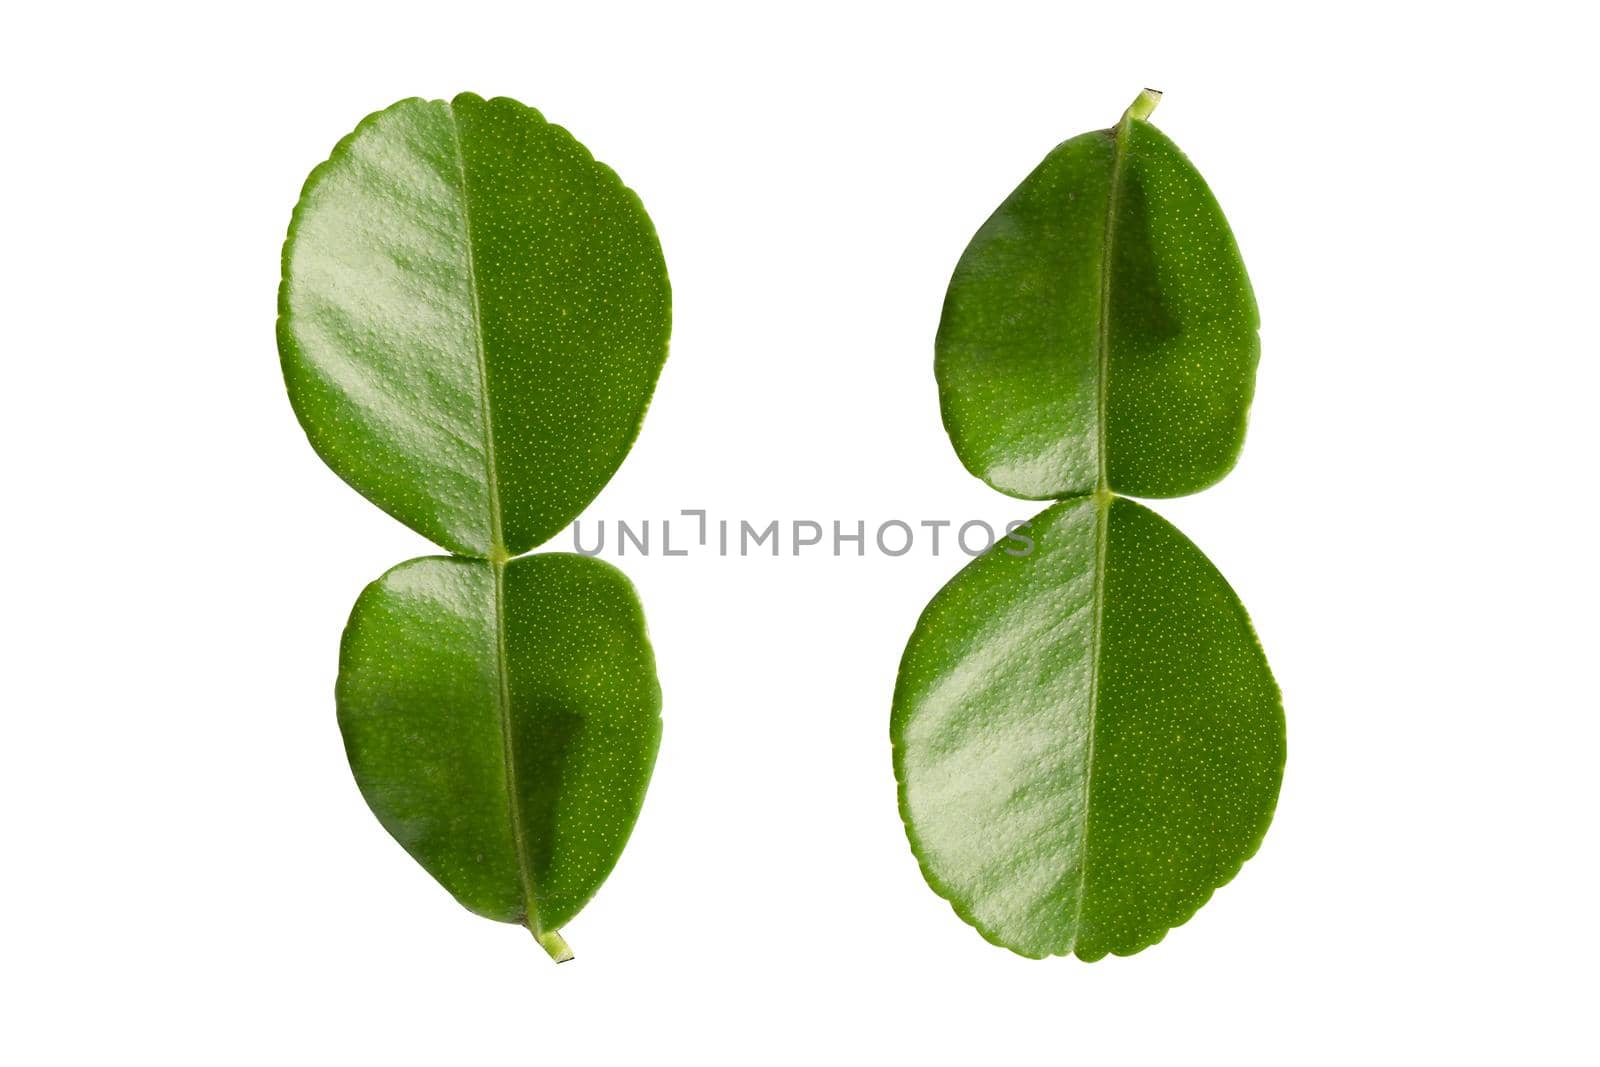 Fresh bergamot leaf or kaffir lime isolate on white background with clipping path, vegetable herb for cooking and health.